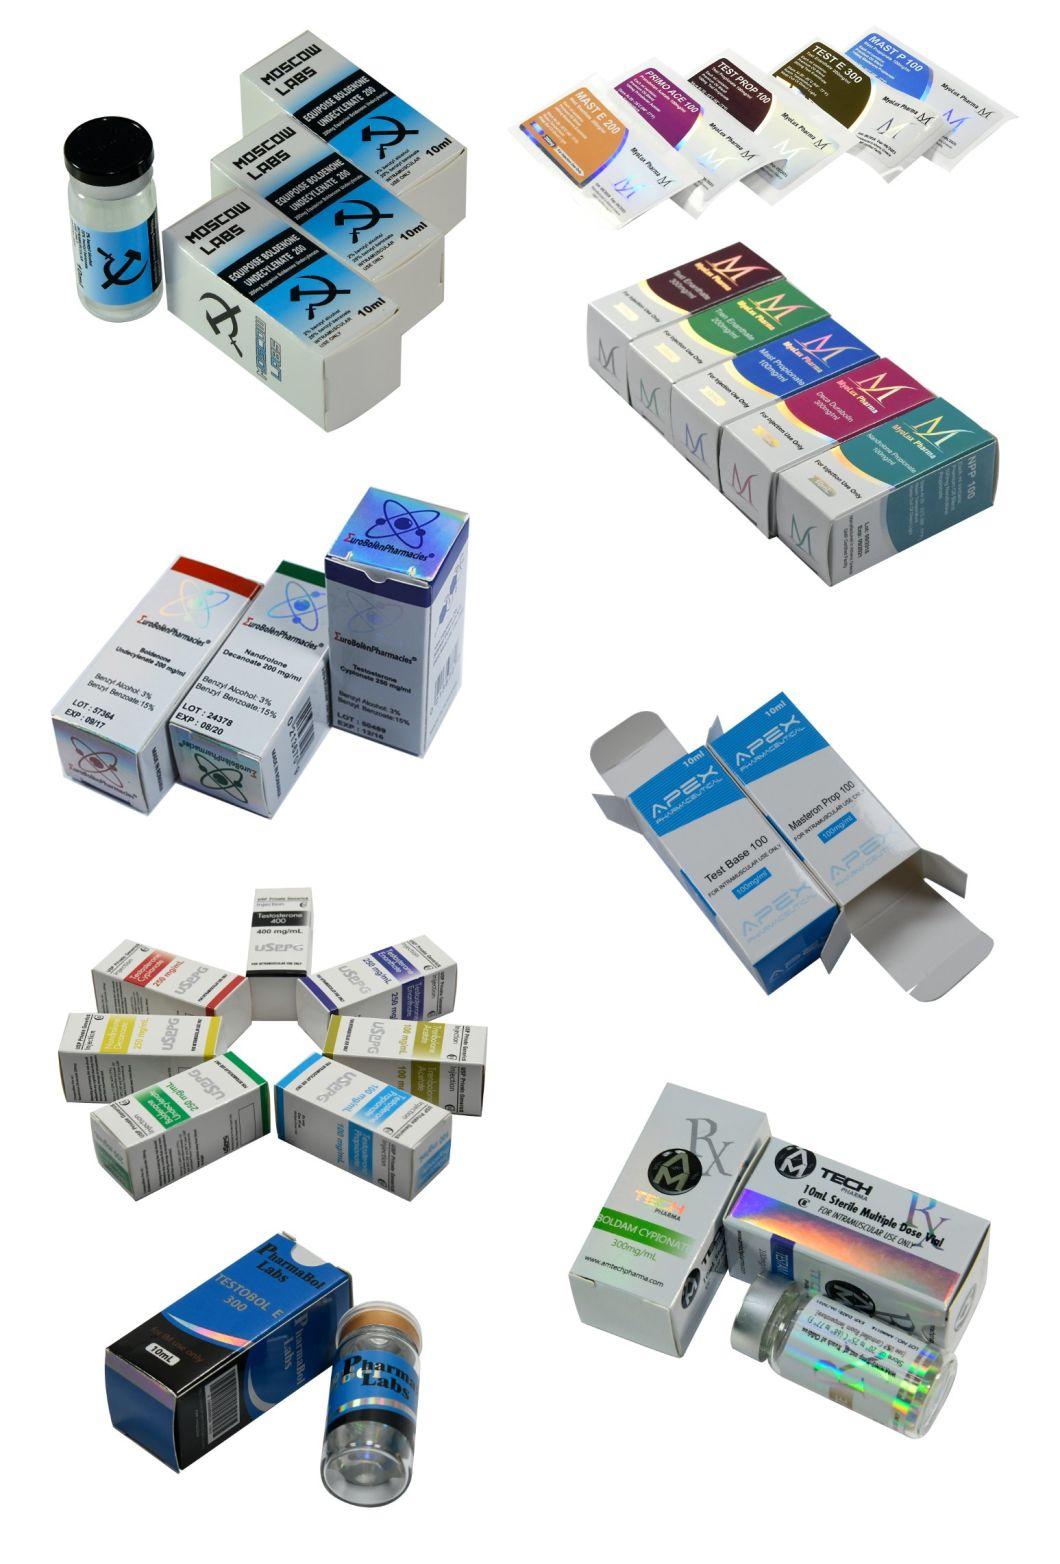 500 Mg Homeopathic Test Labels Liquid Ointment Pill Vial Pharmaceutical Pharma Medicine Packaging Box